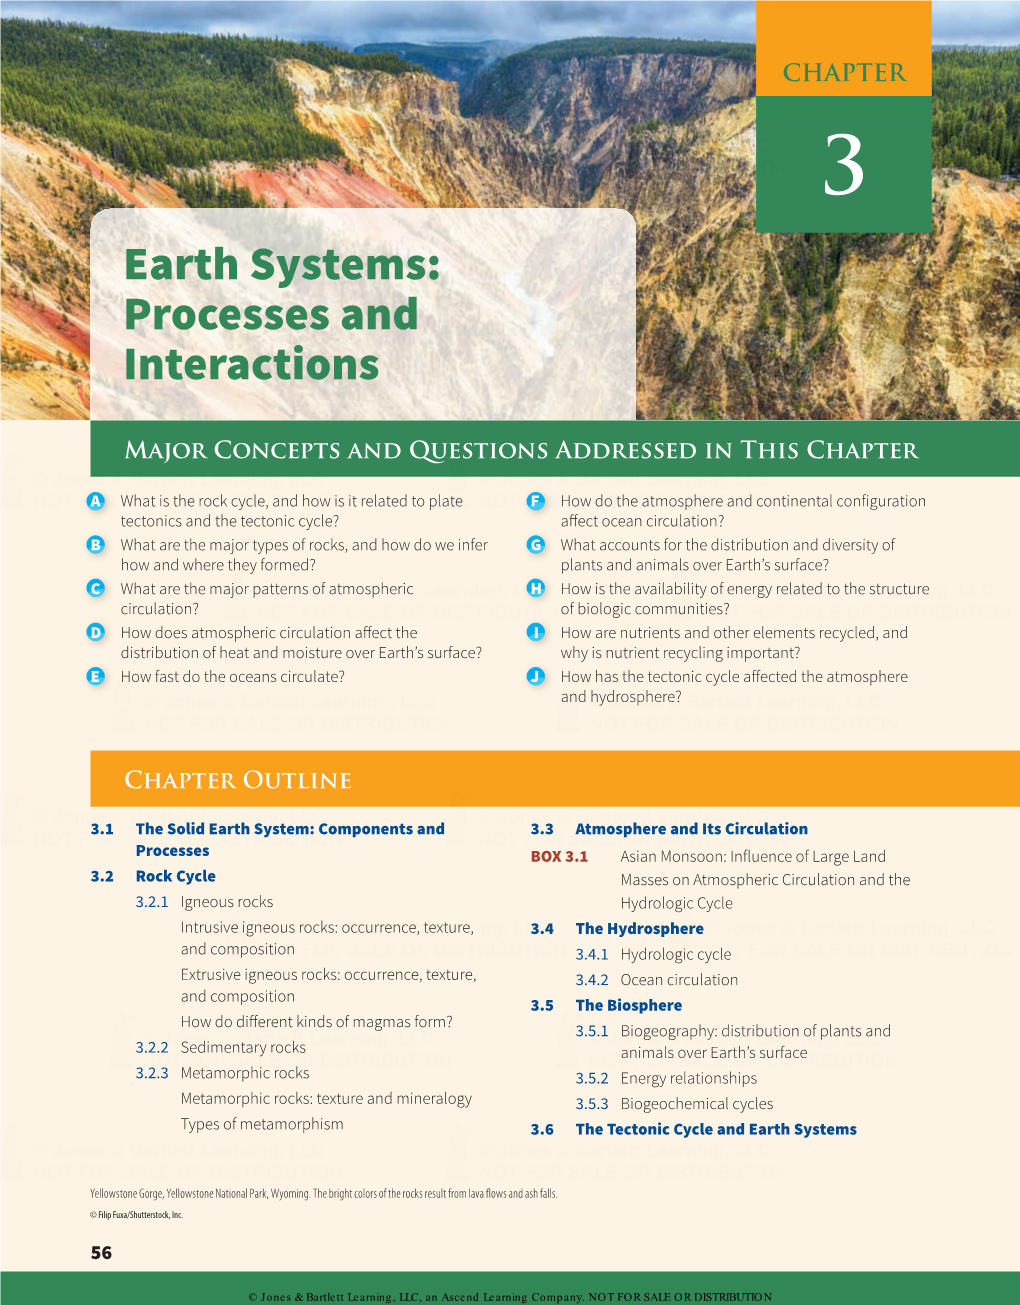 Earth Systems: Processes and Interactions